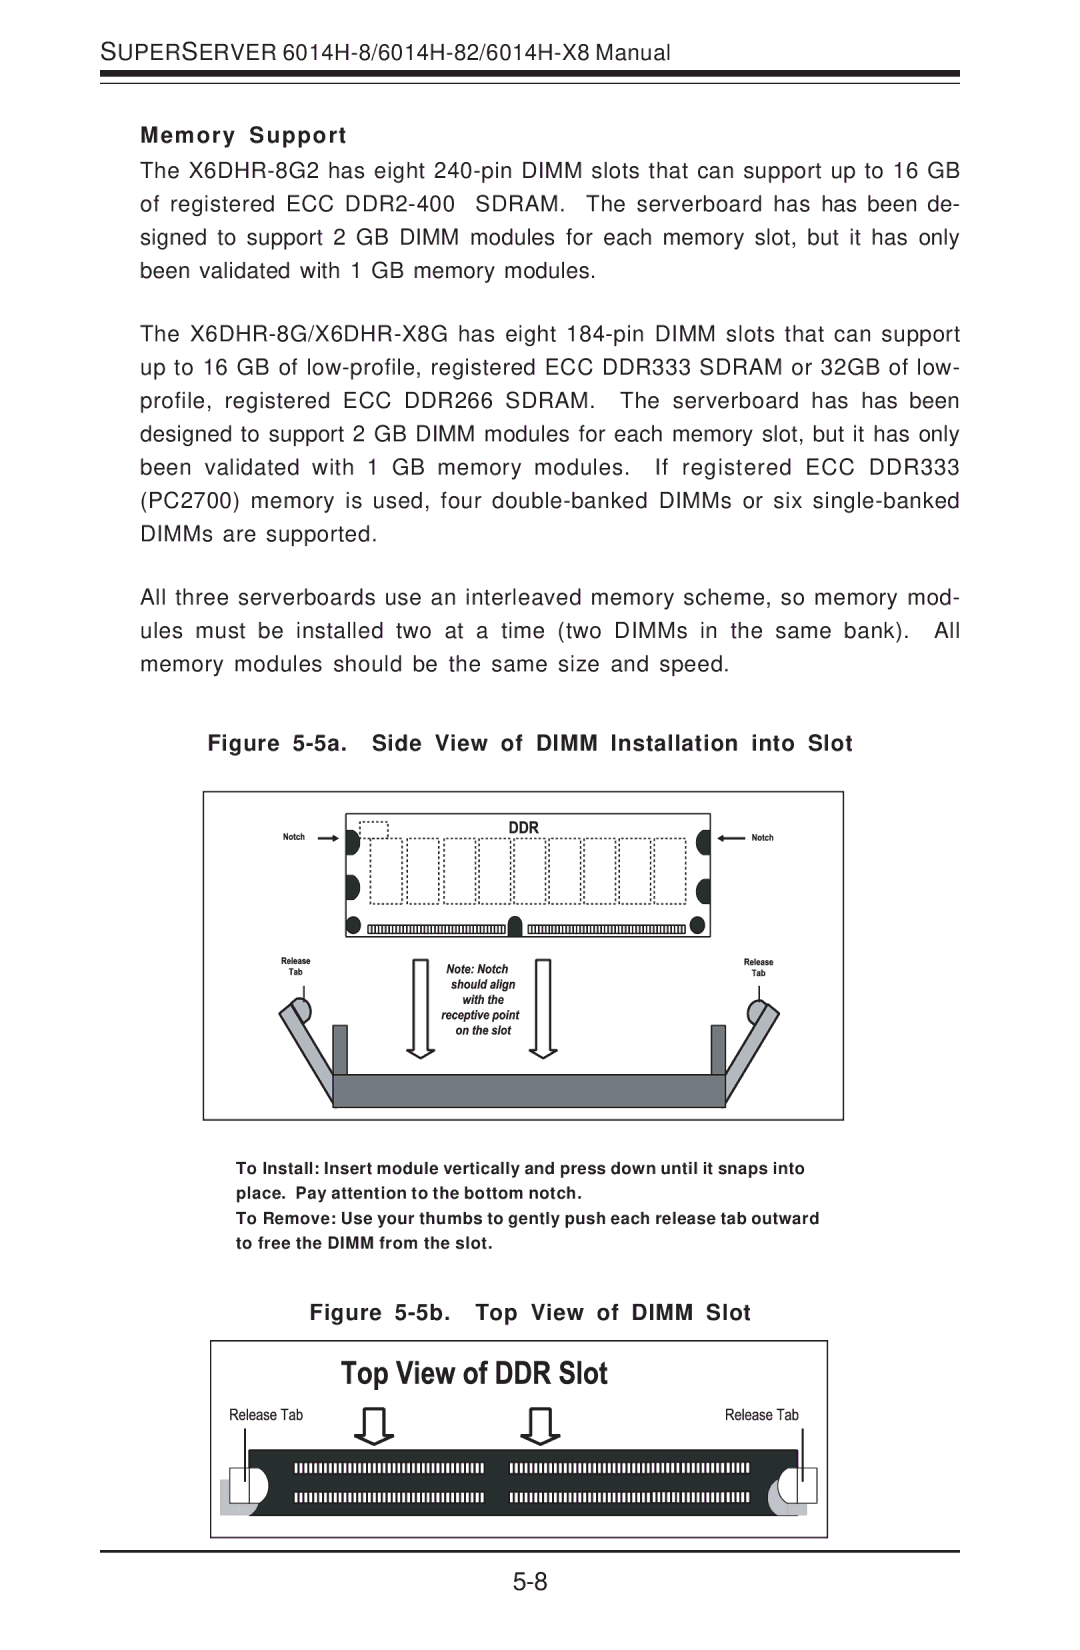 SUPER MICRO Computer 6014H-8 user manual Memory Support, 5a. Side View of Dimm Installation into Slot 